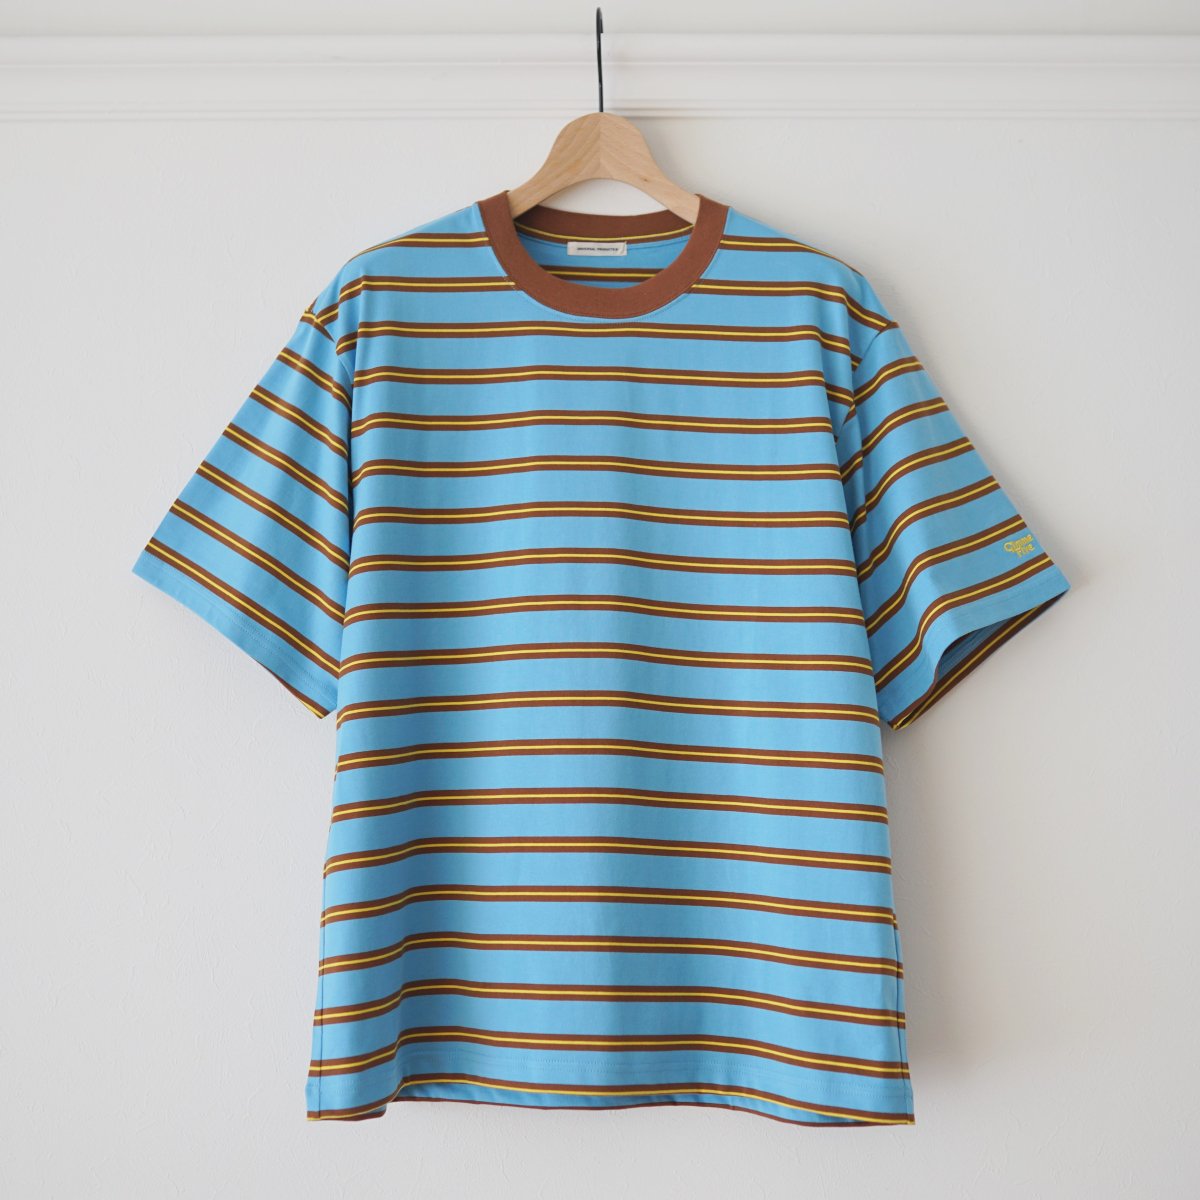 【UNIVERSAL PRODUCTS ユニバーサルプロダクツ】GIMME FIVE MULTI BORDER S/S T-SHIRT - BLUE